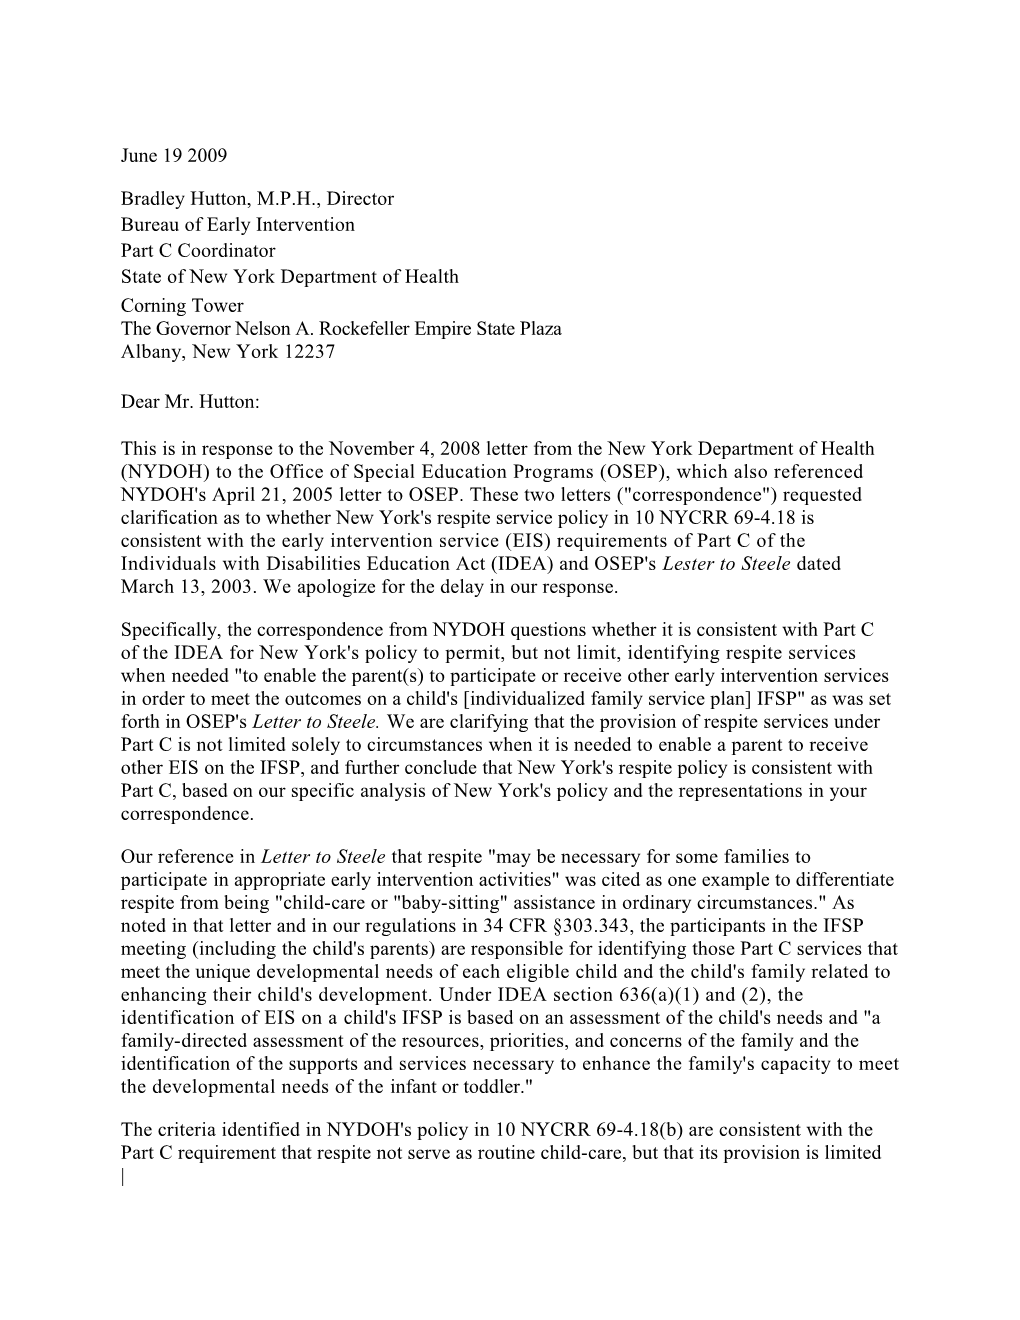 Hutton Letter Dated 06/19/09 Re: Early Intervention Services (MS Word)